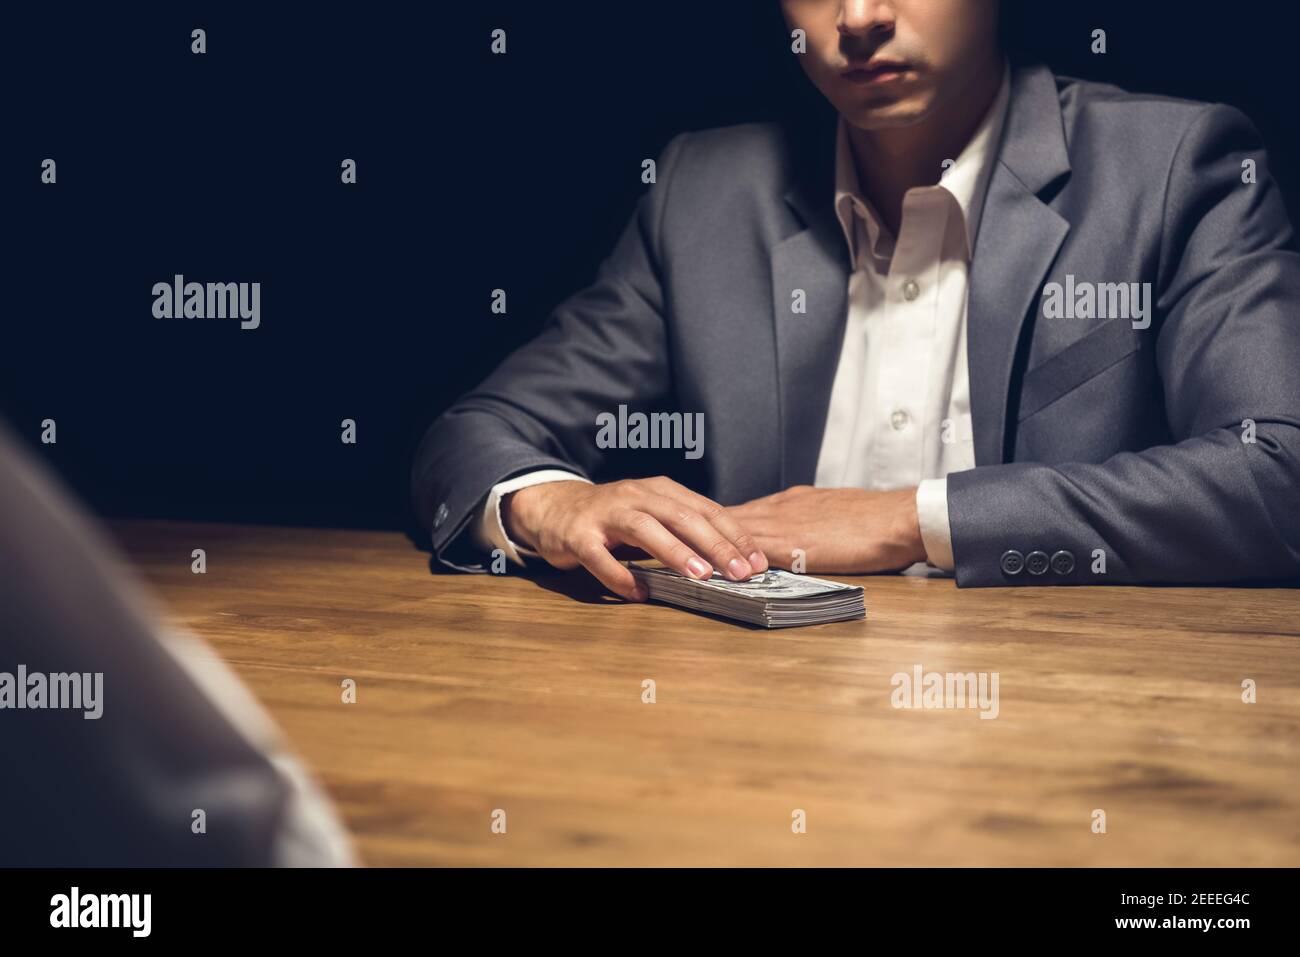 Dishonest businessman about to give money to his partner in the dark - bribery, scam and venality concepts Stock Photo